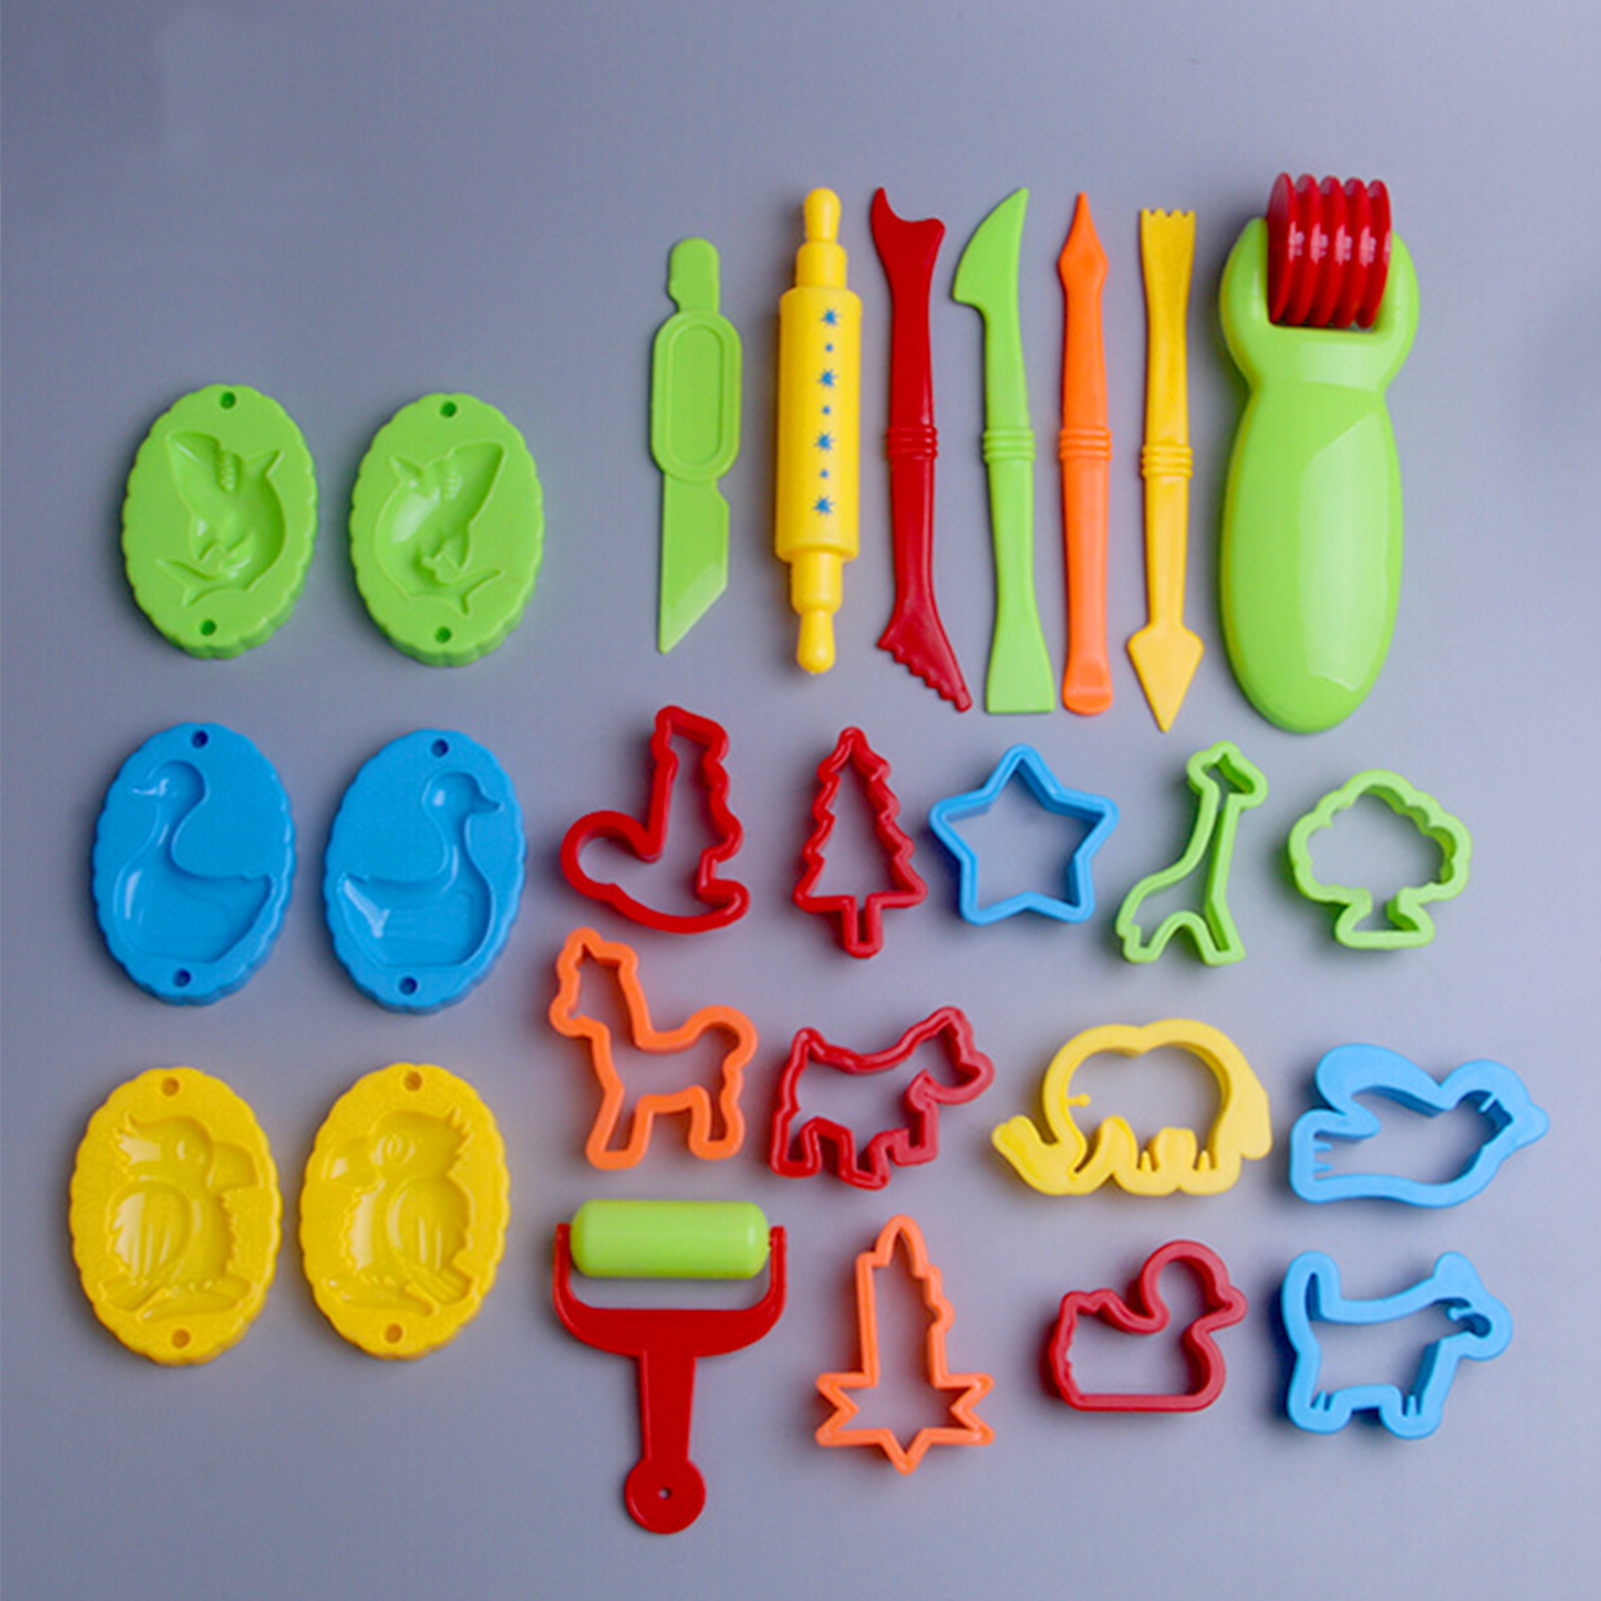 26 Pieces Play Dough Tools Playdough Accessories Set Various Molds Rollers  Cutters Educational Gift for Children, Random Color